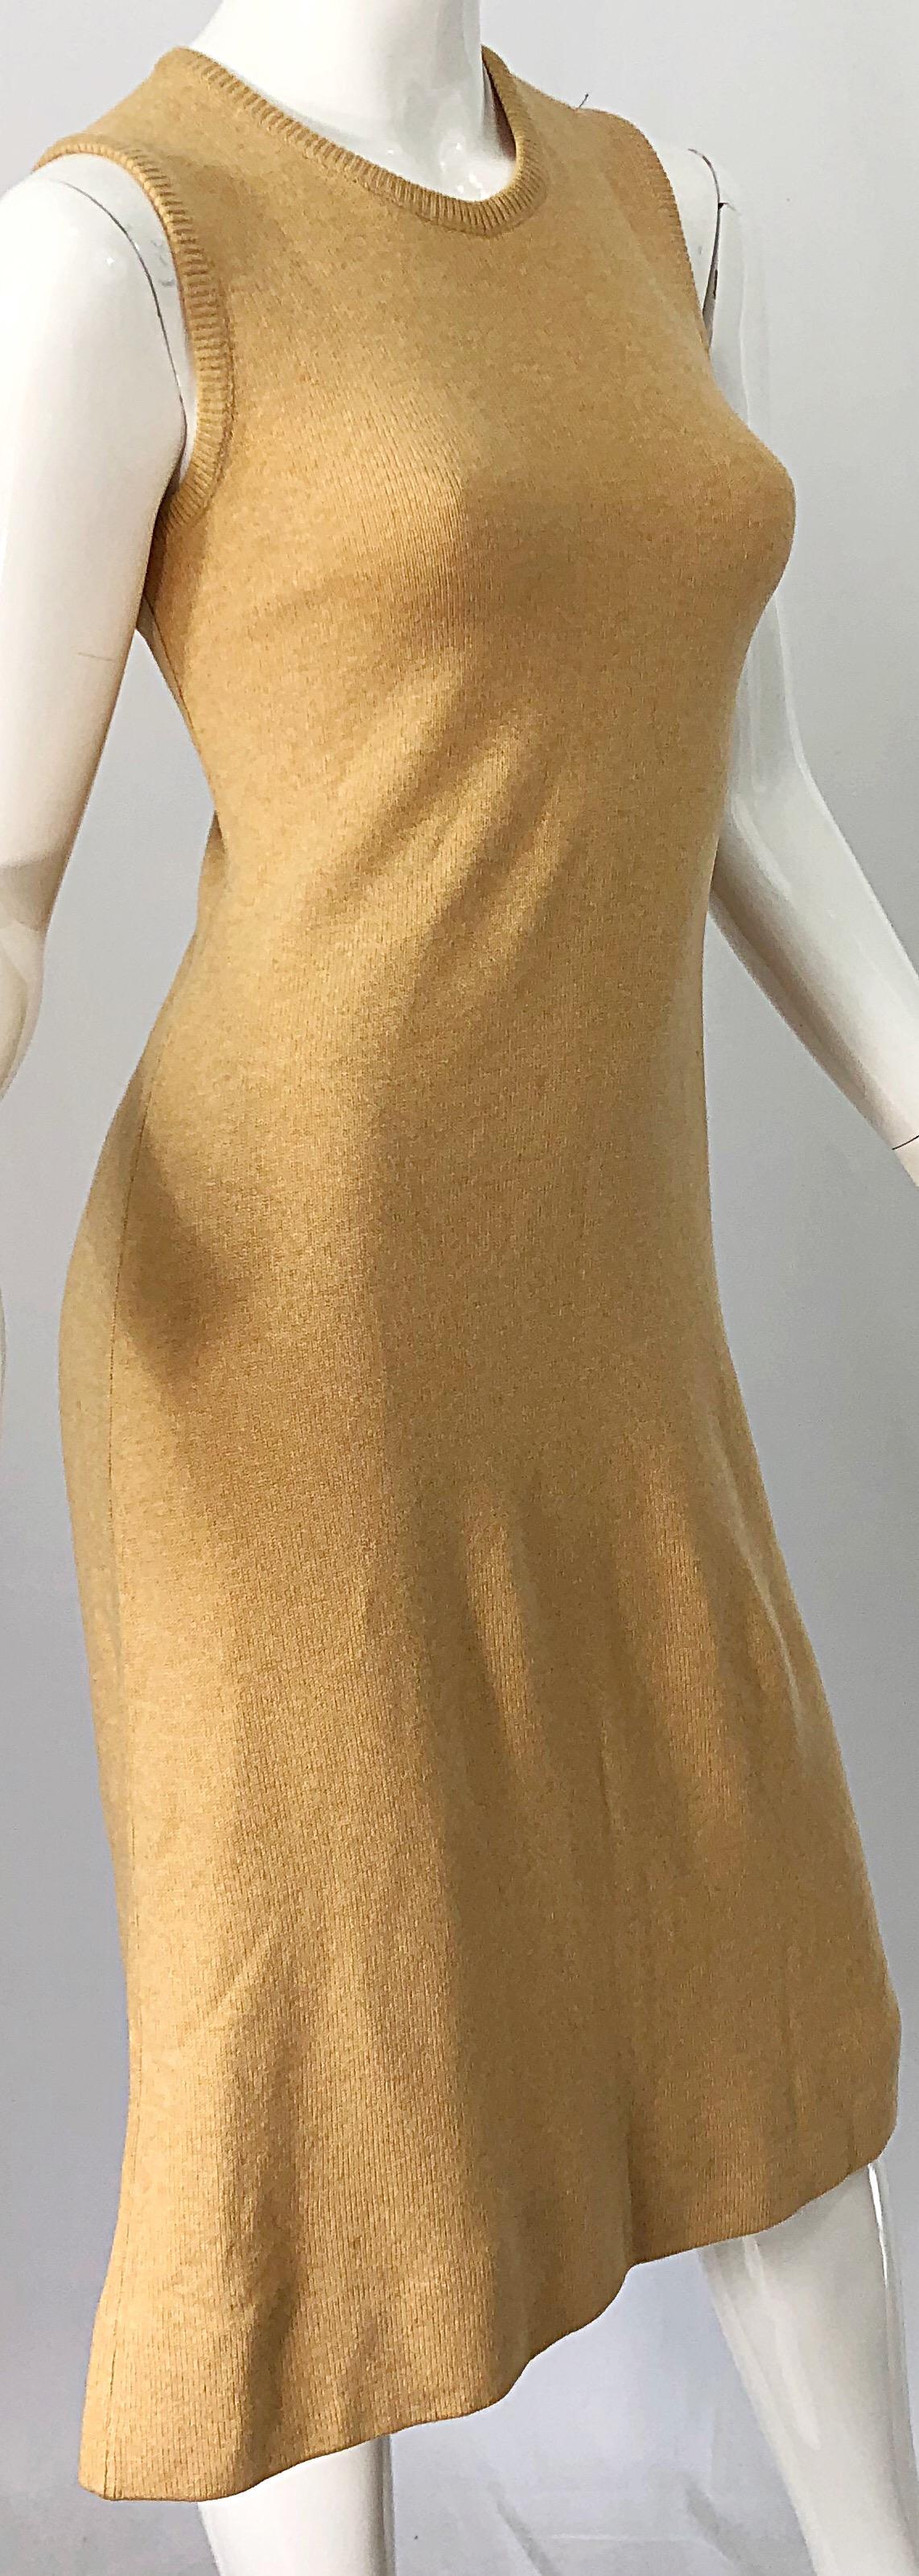 1970s HALSTON Cashmere Camel Tan 70s Vintage Dress and Cardigan Sweater Jacket For Sale 2